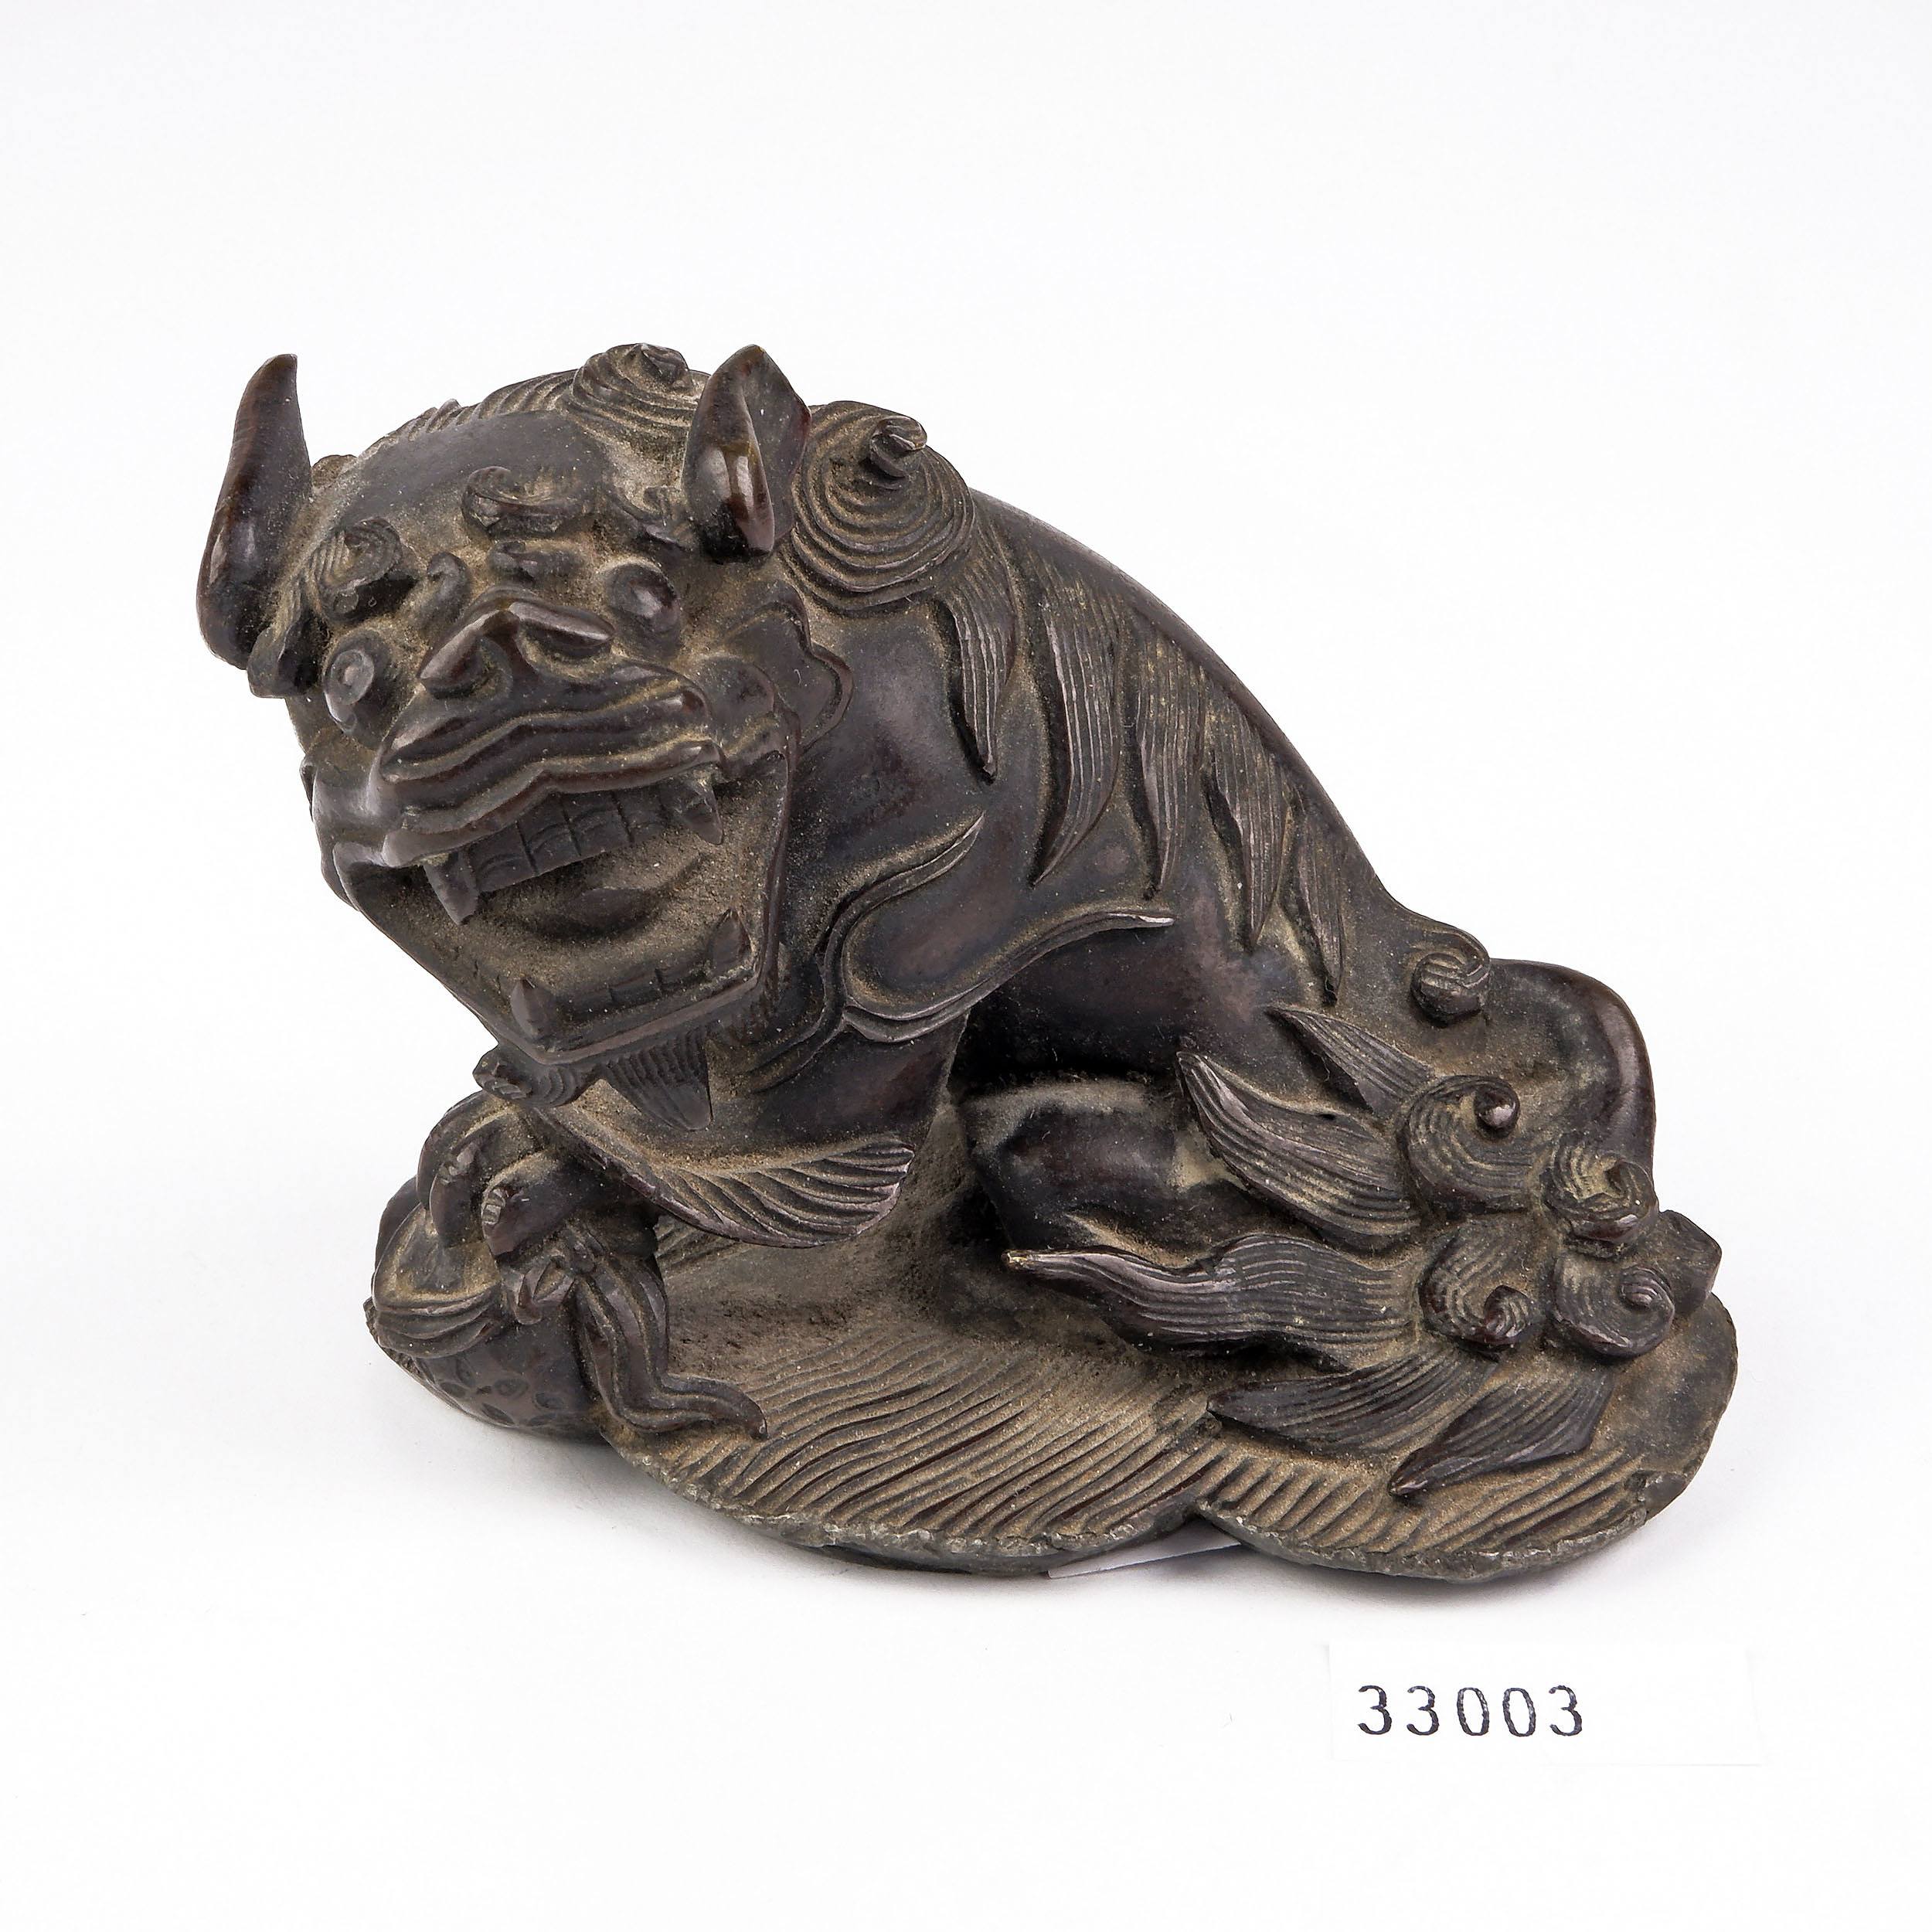 'Antique Chinese Bronze Model of a Buddhist Lion, Qing Dynasty'